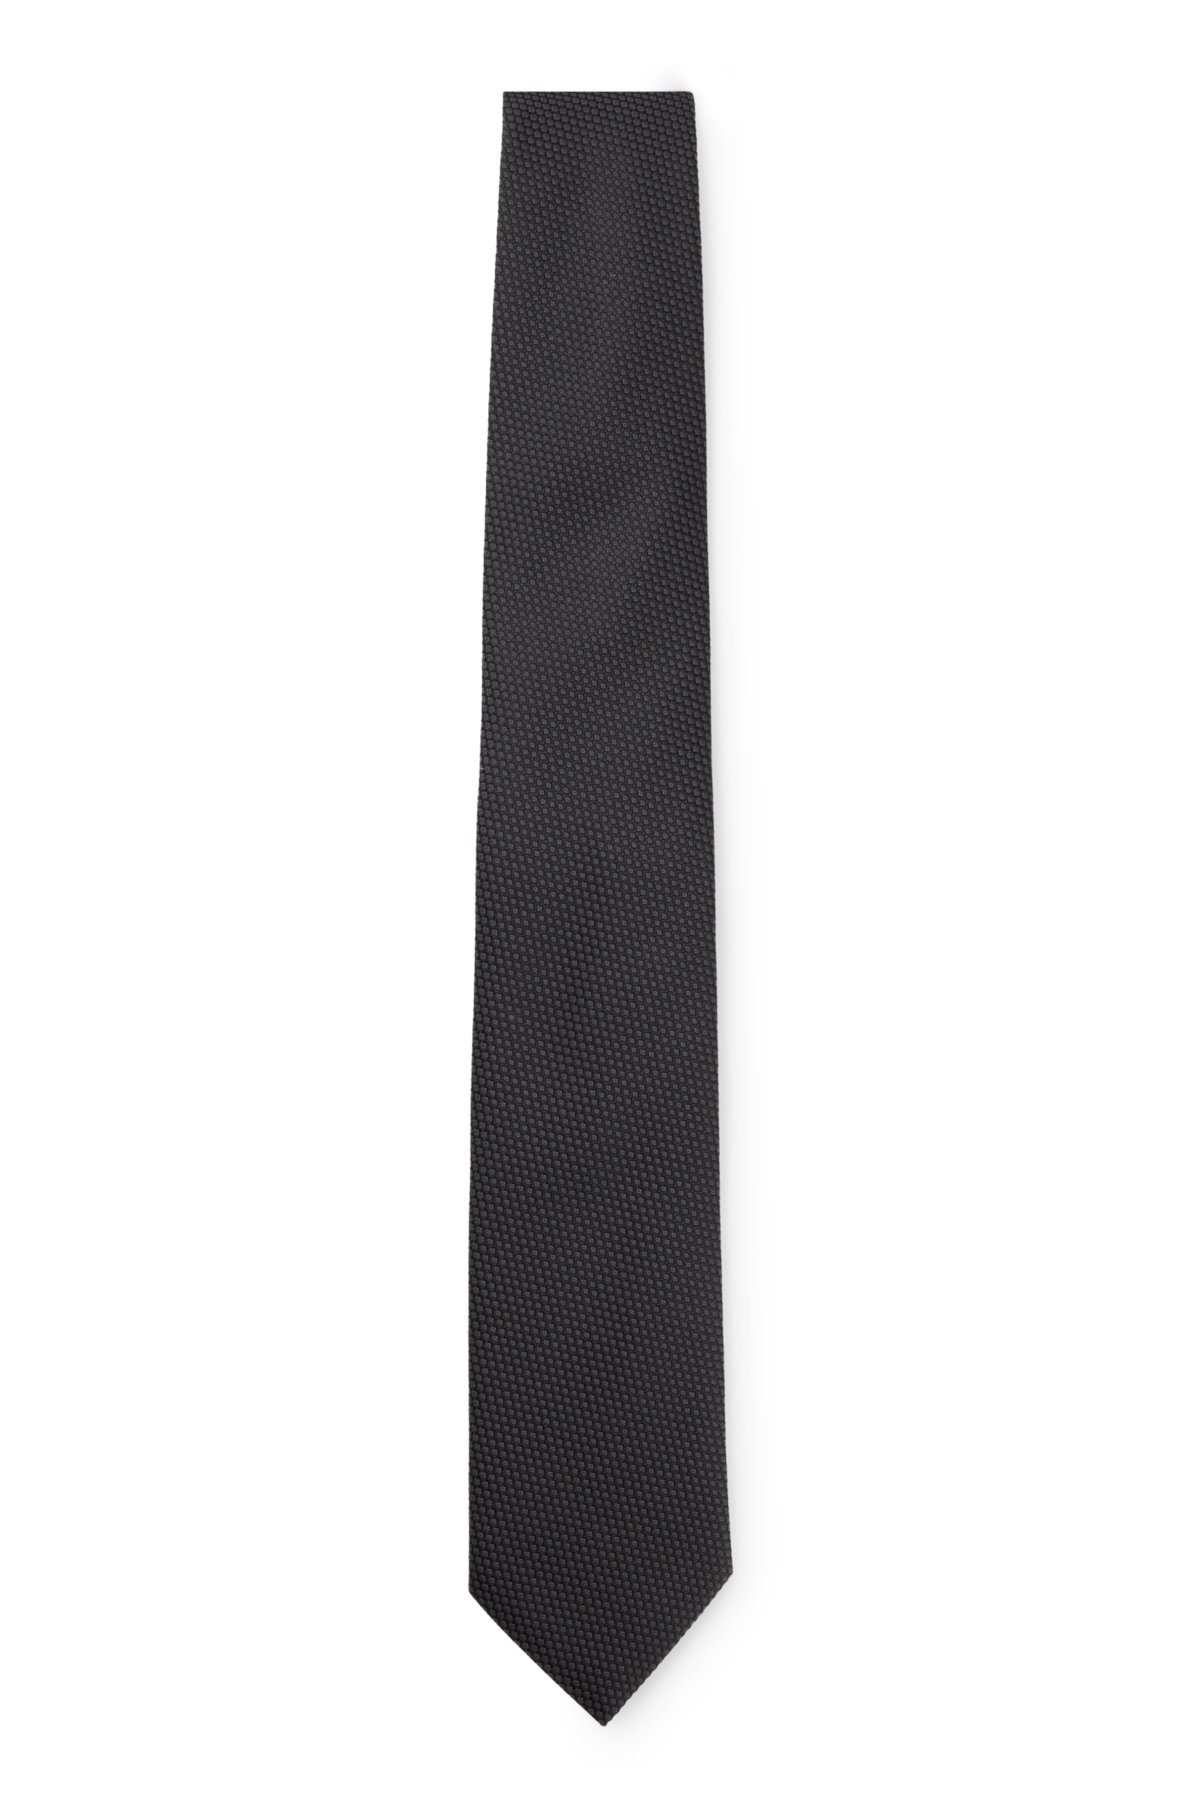 Silk-blend tie with all-over micro pattern, Black